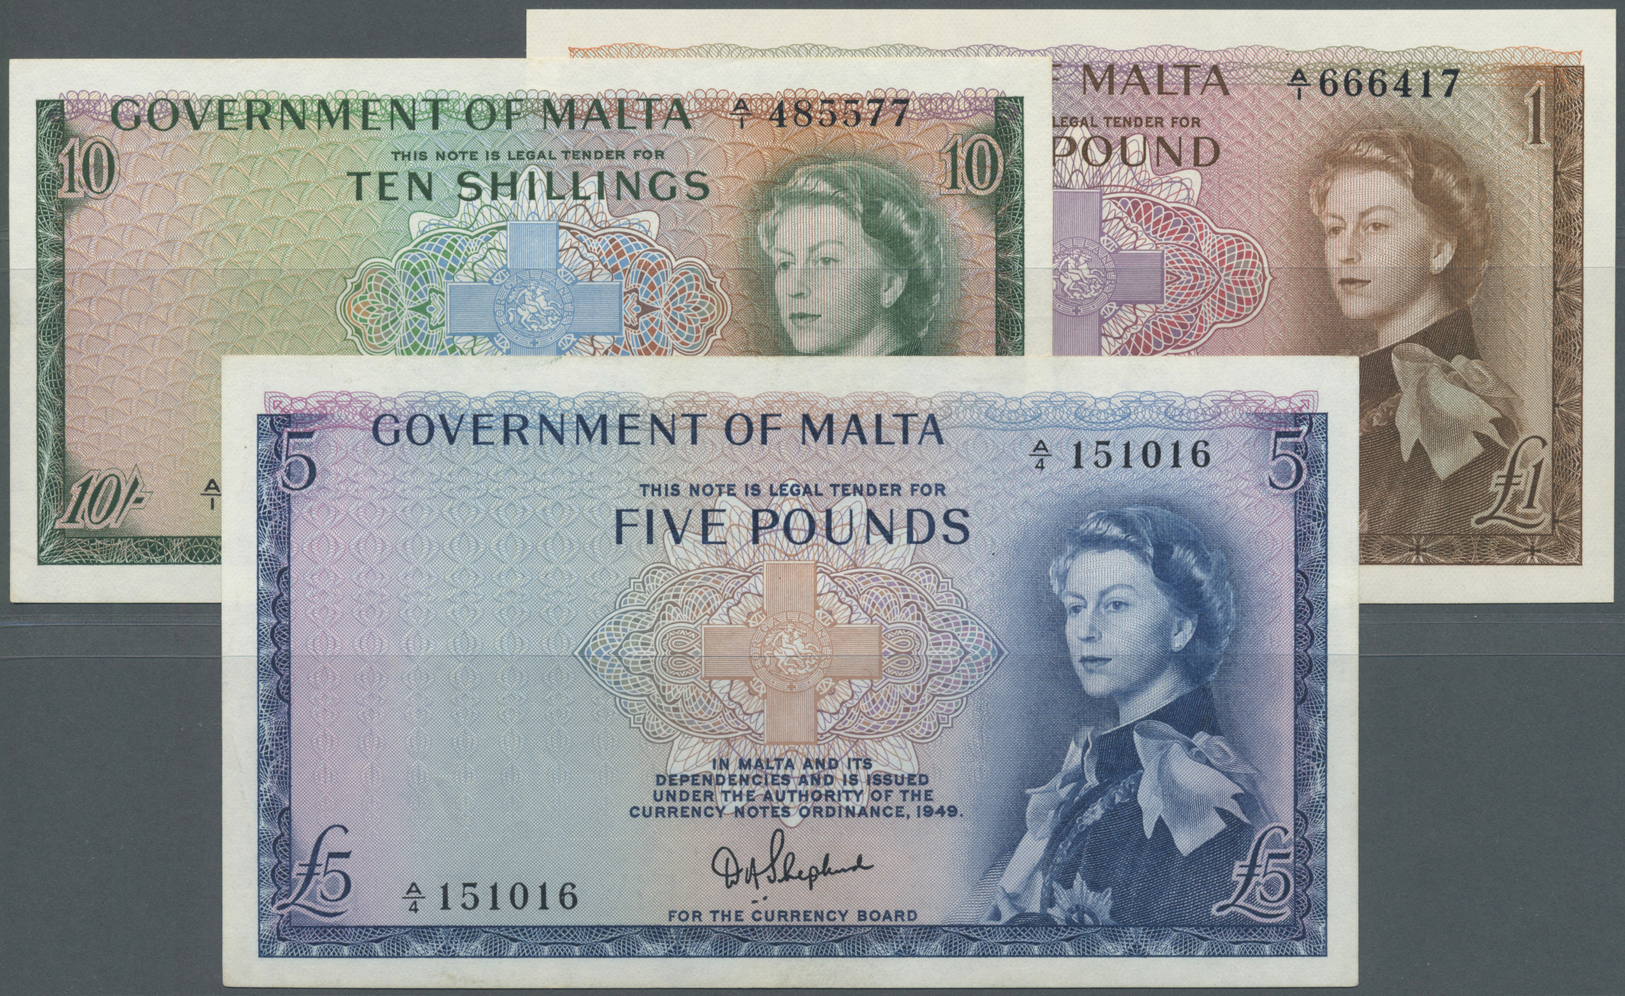 01659 Malta: Small Set With 3 Banknotes Series 1963 With 10 Shillings In AUNC With A Few Minor Creases In The Paper , 1 - Malta